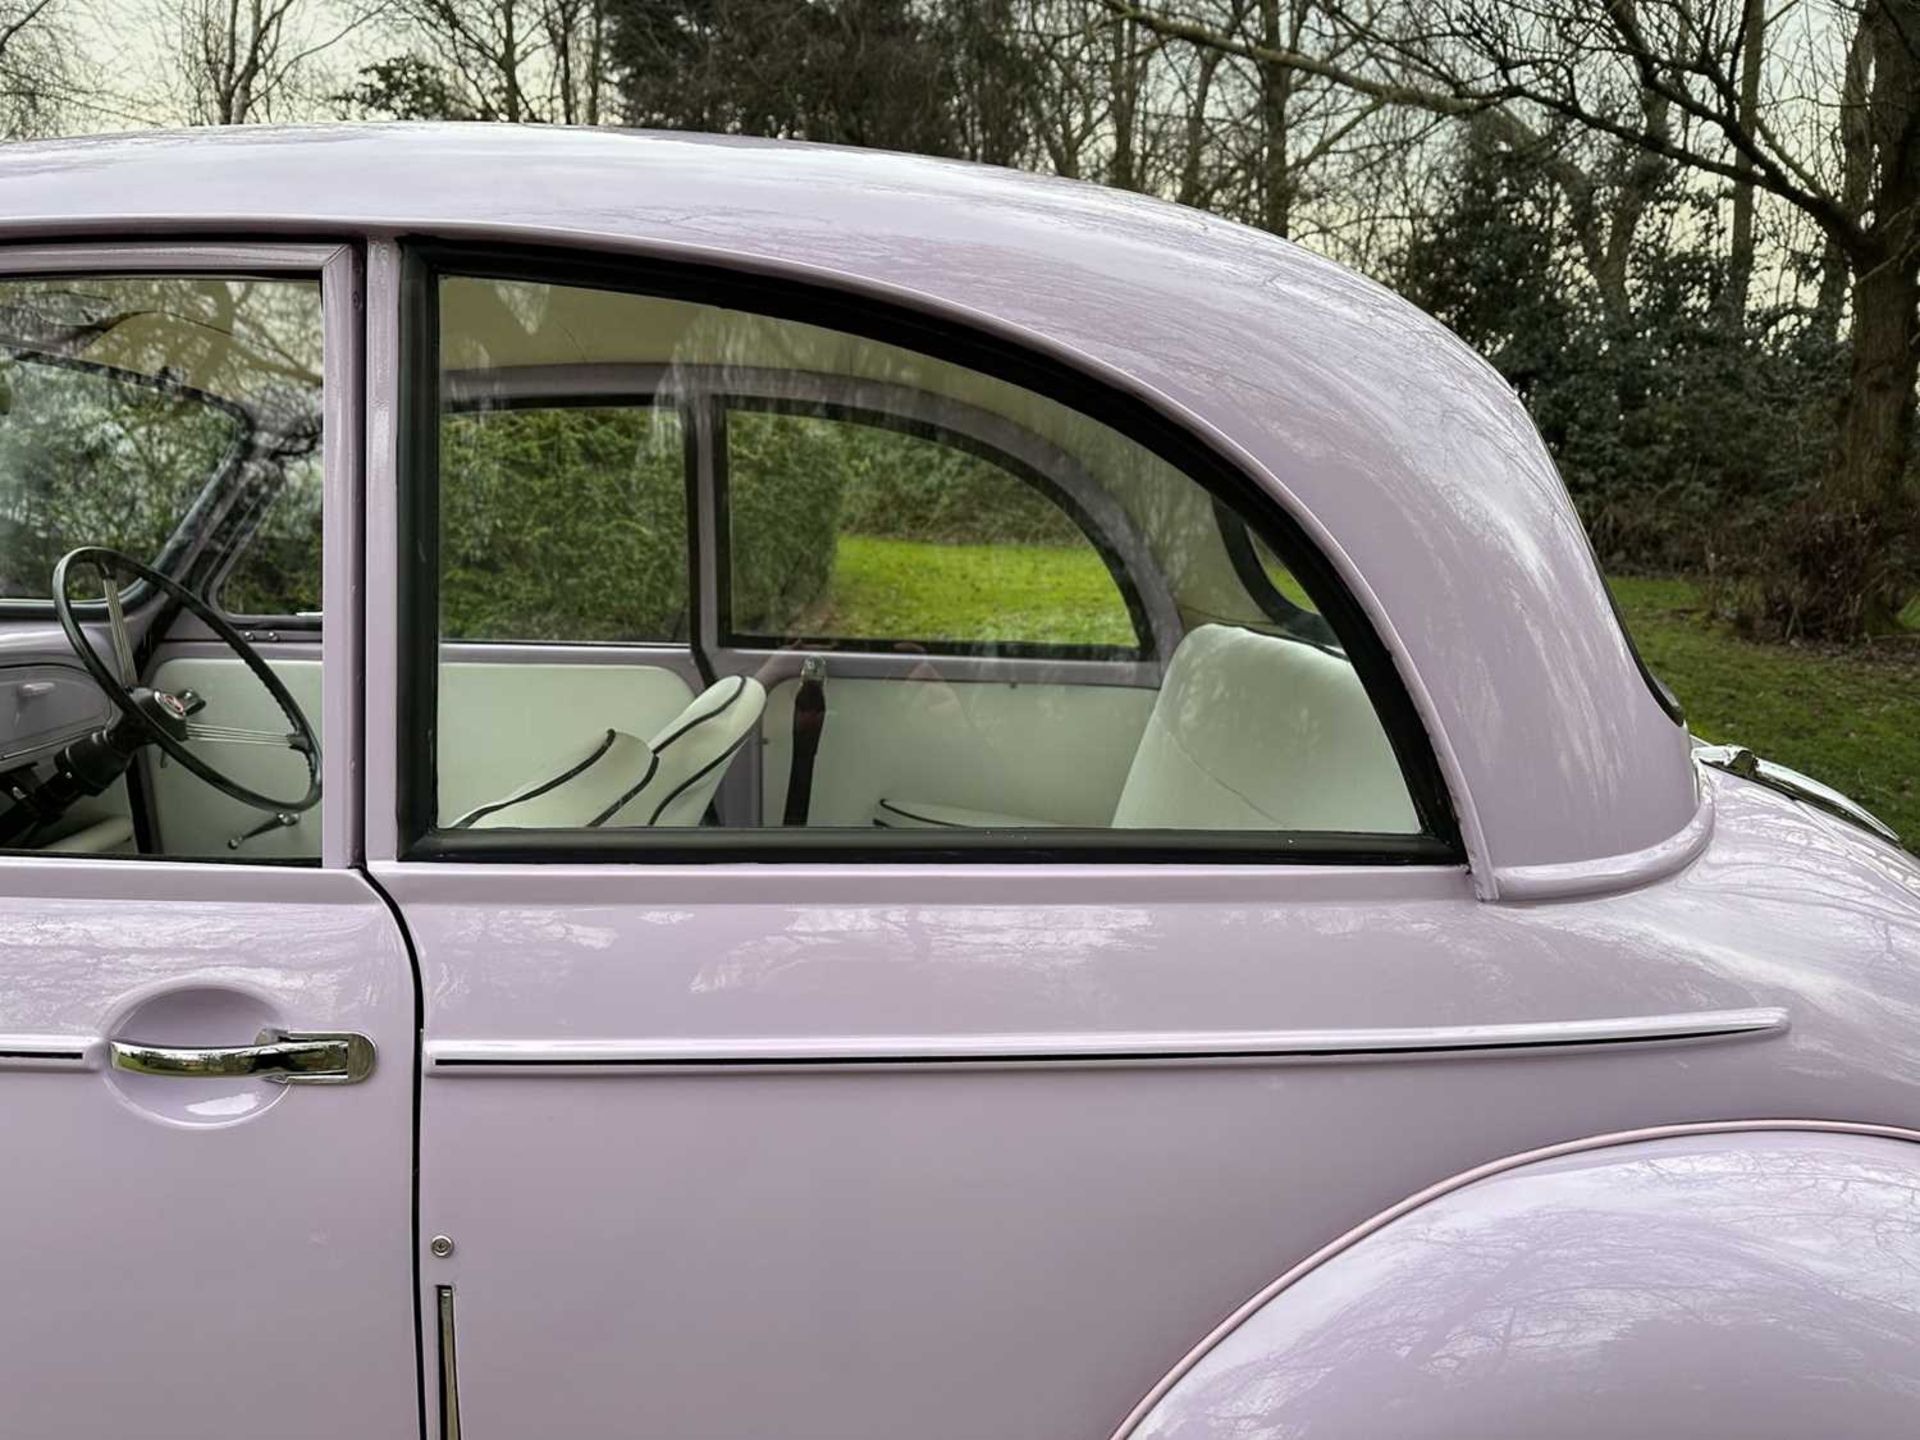 1961 Morris Minor Million 179 of 350 built, fully restored, only three owners from new - Image 81 of 100